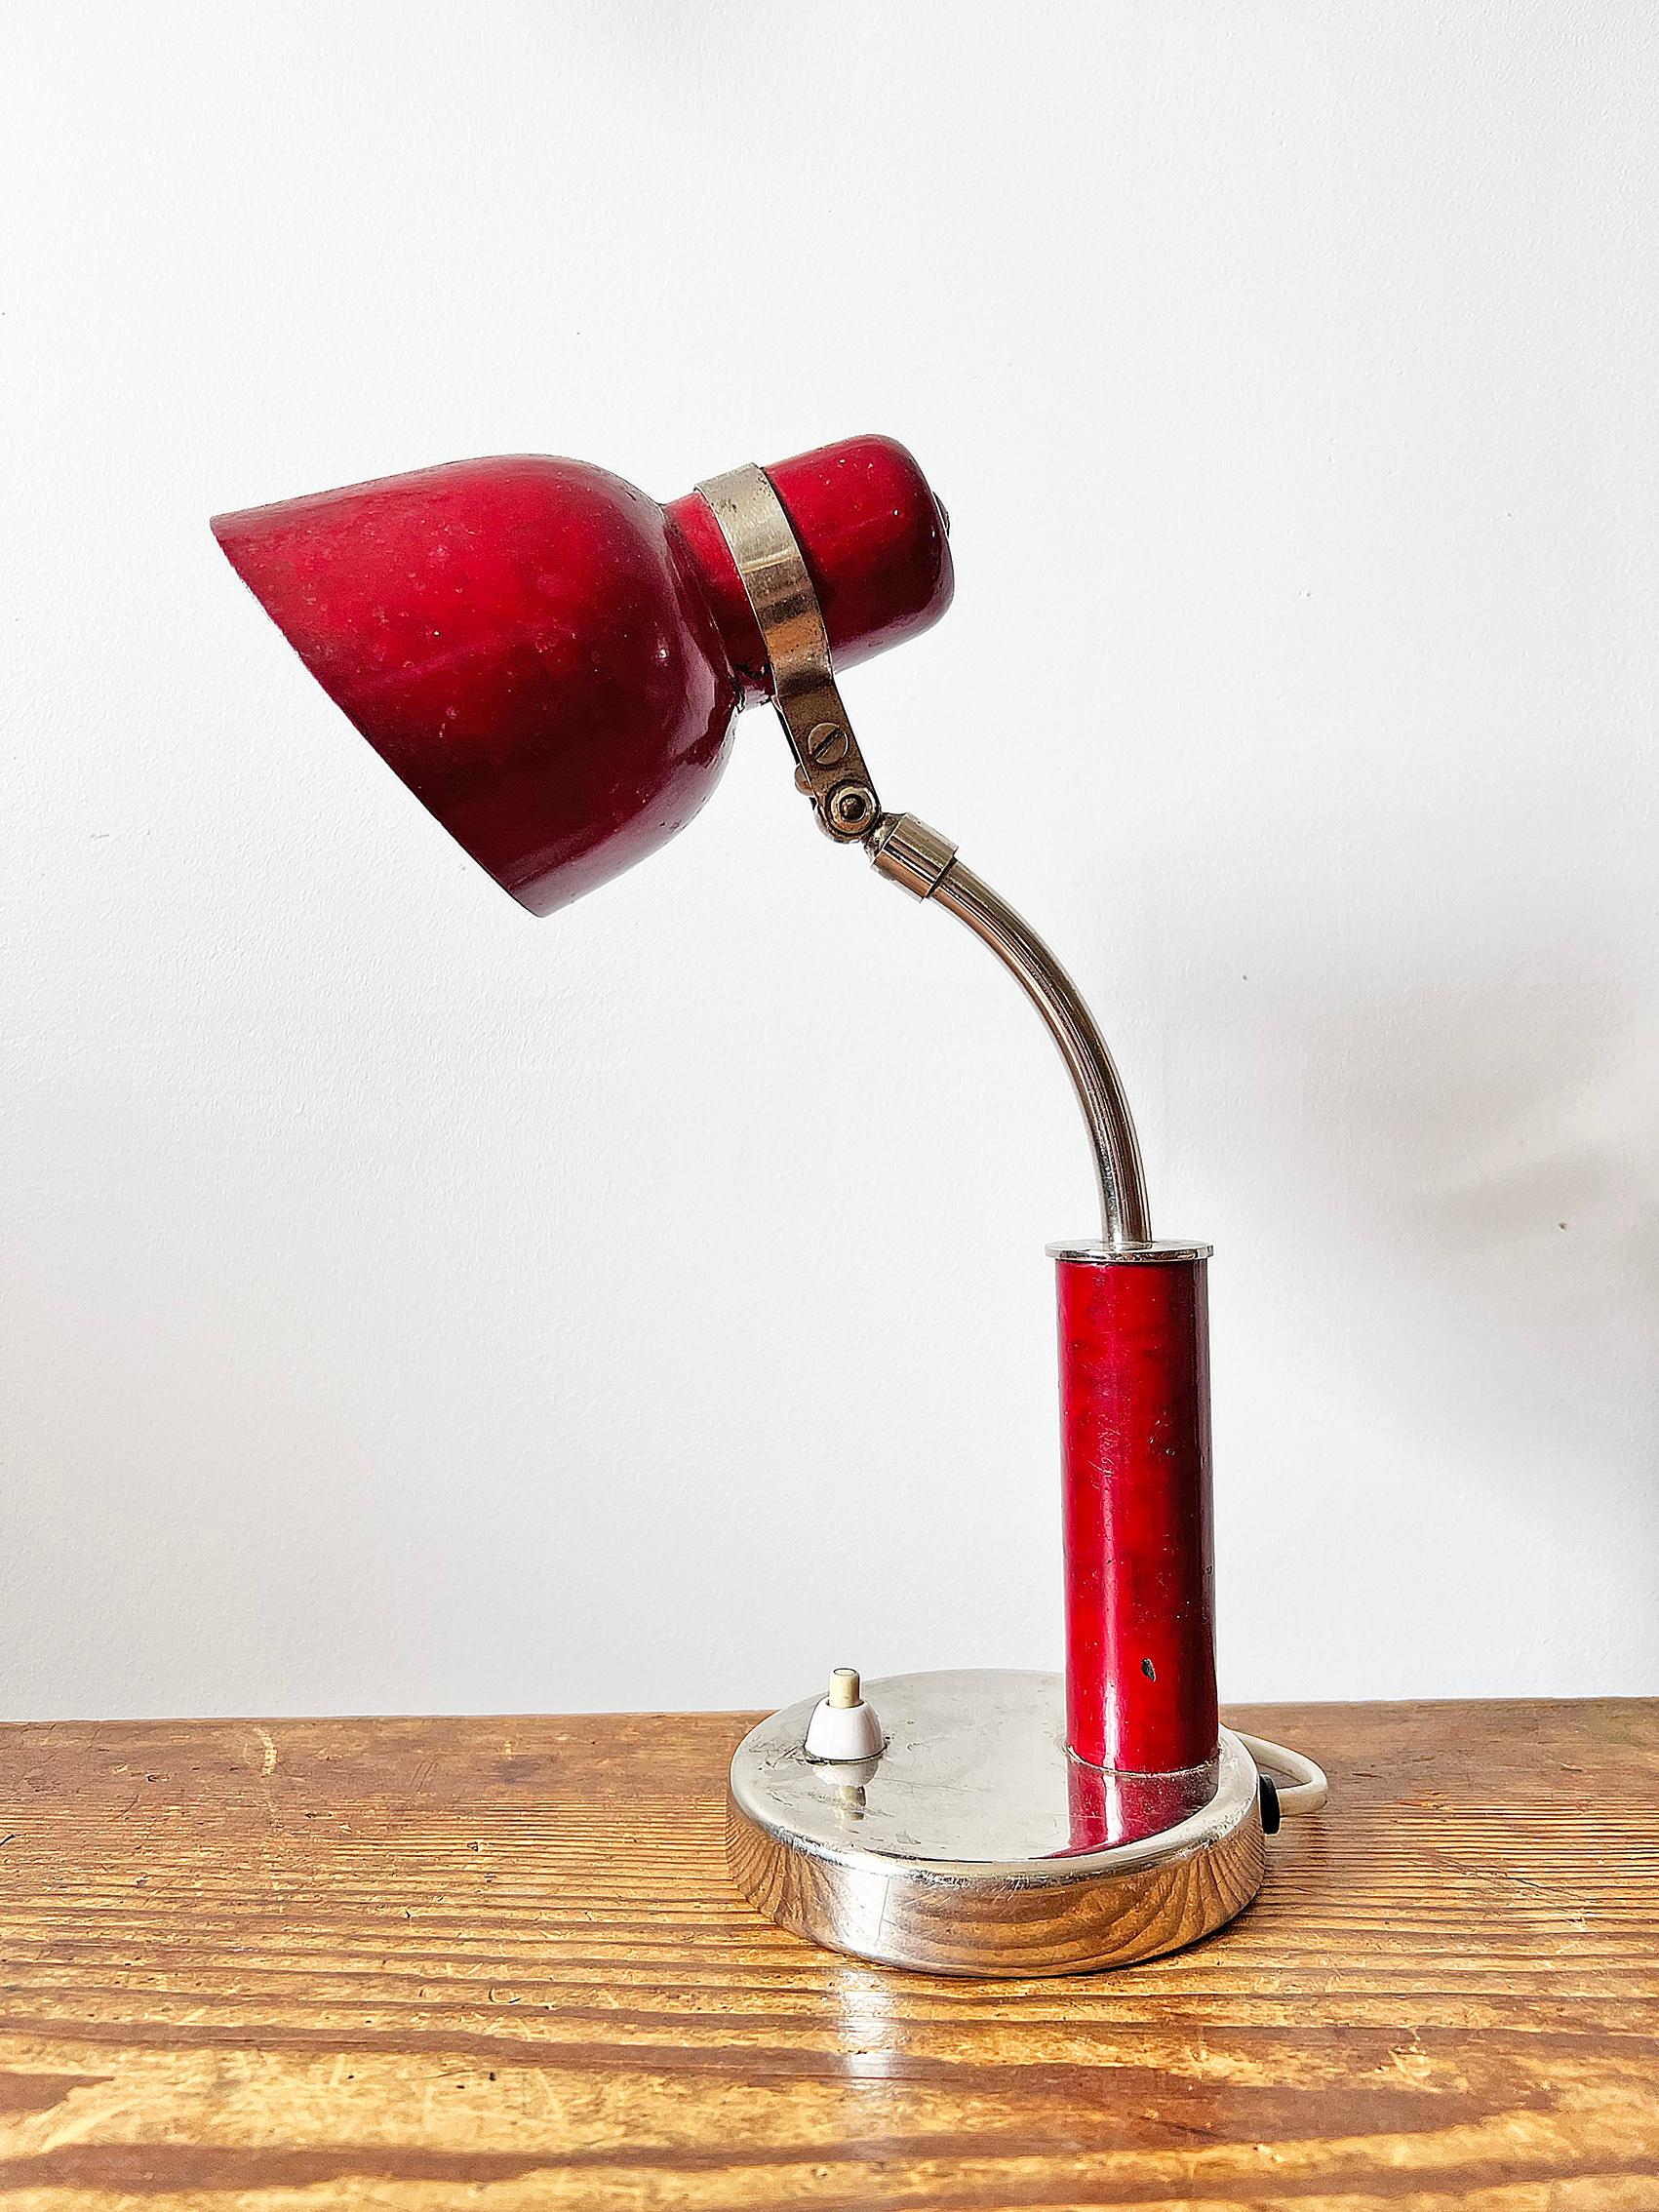 Table or wall lamp from most likely Nordiska Kompaniet, NK. Produced in Sweden during ca 1930-1940's. Adjustable in angle. The lamp can also be hung as a wall lamp. 
Condition: Wear and patina consistent with age and use. Repainted. Color loss,